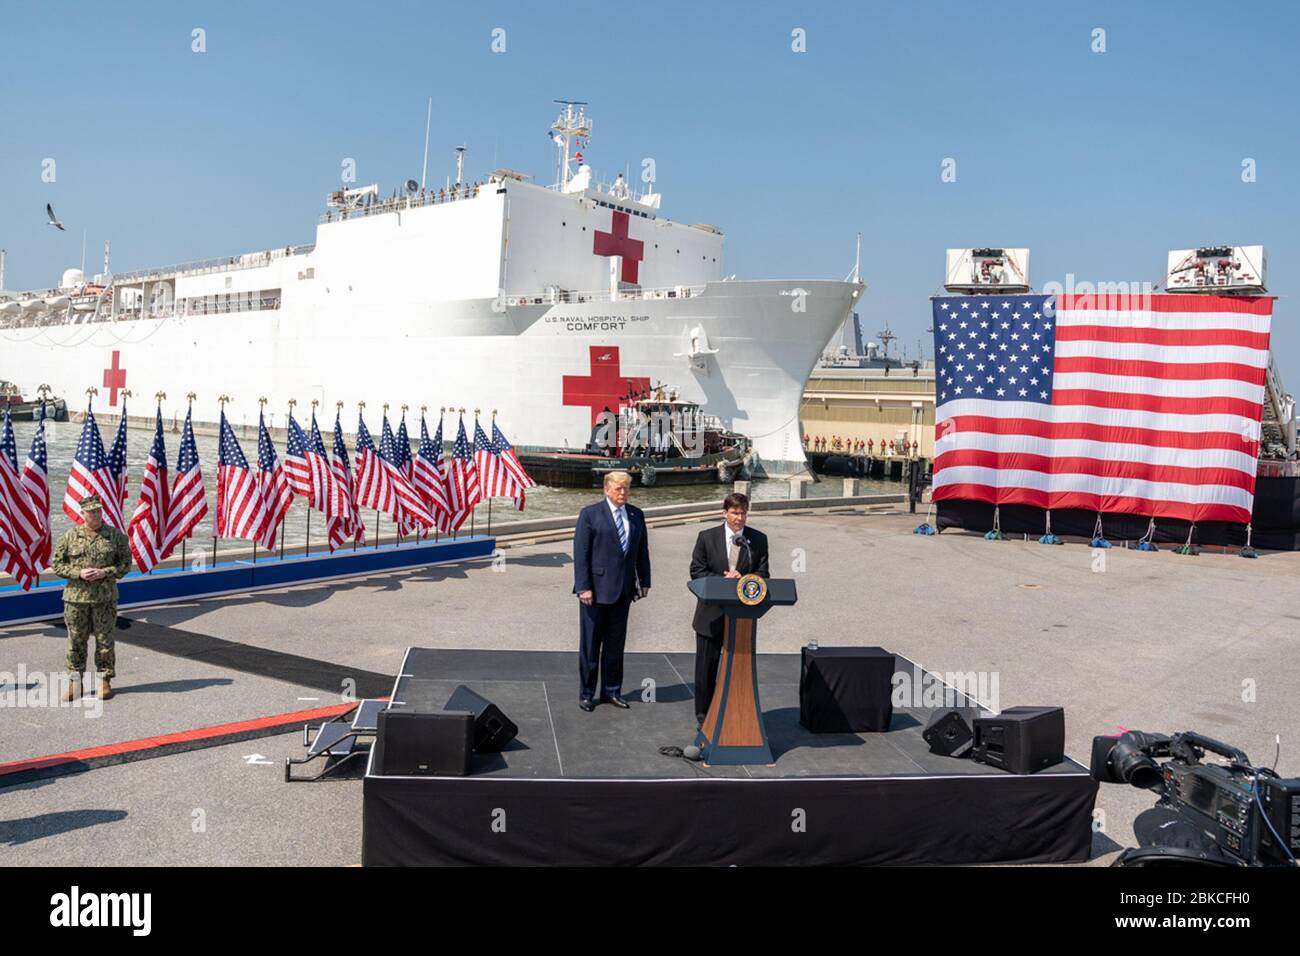 President Donald J. Trump listens as Secretary of Defense Mark Esper delivers remarks at Naval Air Station Norfolk Pier 8, Saturday, March 28, 2020, prior to the departure of the USNS Comfort, a U.S. Navy hospital ship stationed in Norfolk, Virginia. President Trump at the Send Off for the USNS Comfort Stock Photo